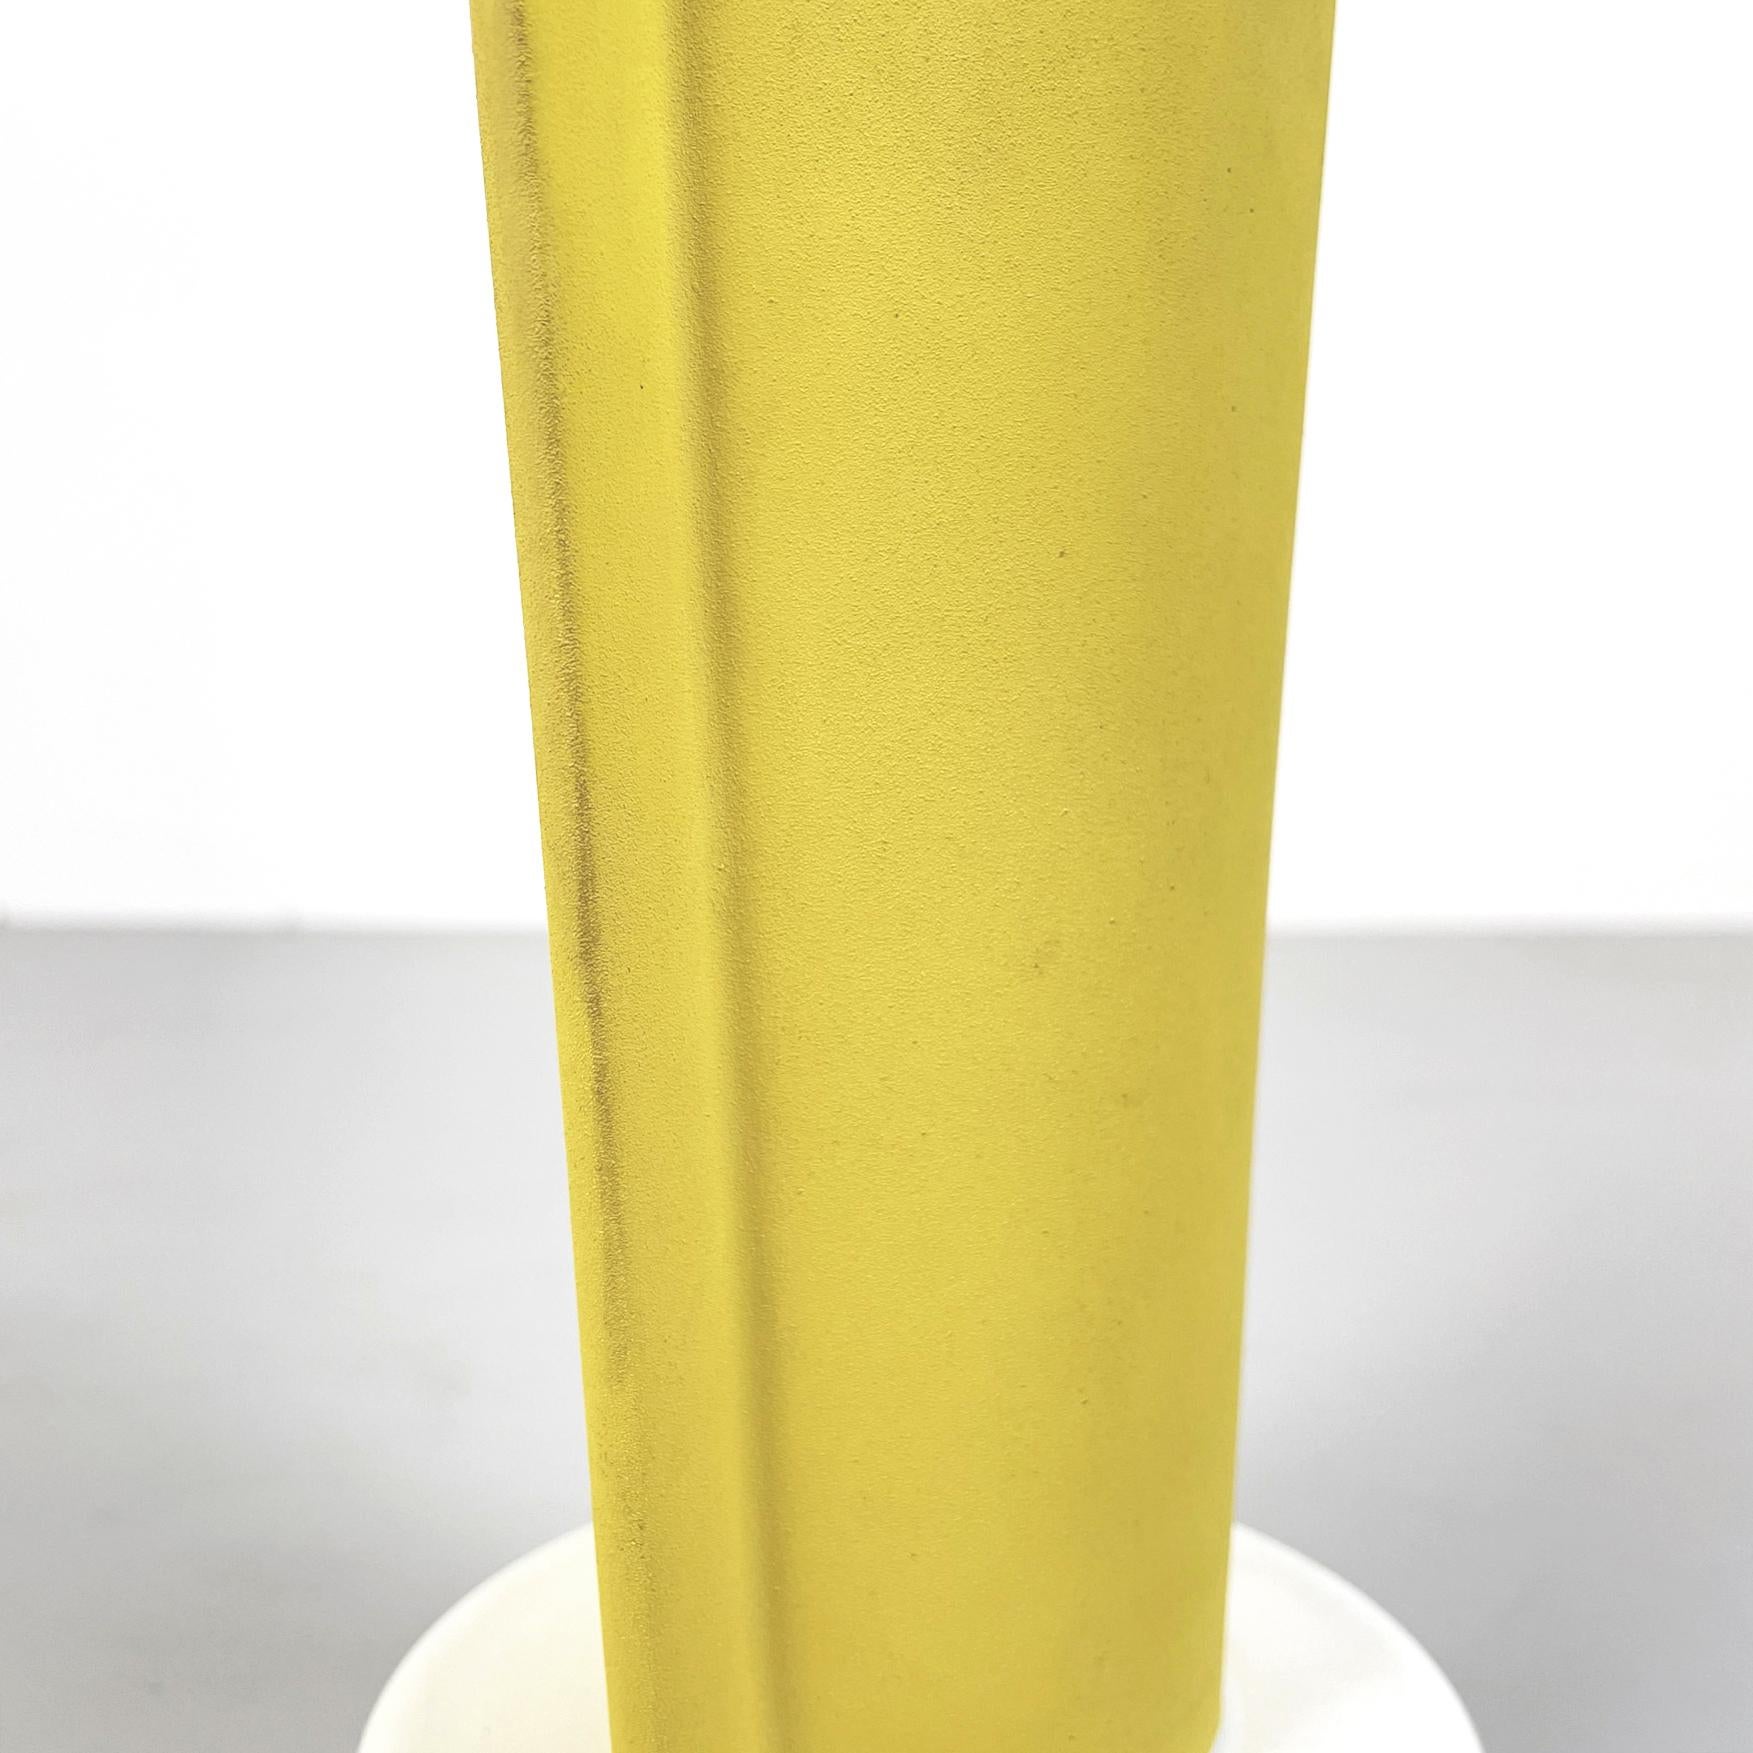 Italian Modern Yellow Ceramic Vase ET1 by Ettore Sottsass for A. Sarri, 1990s For Sale 5